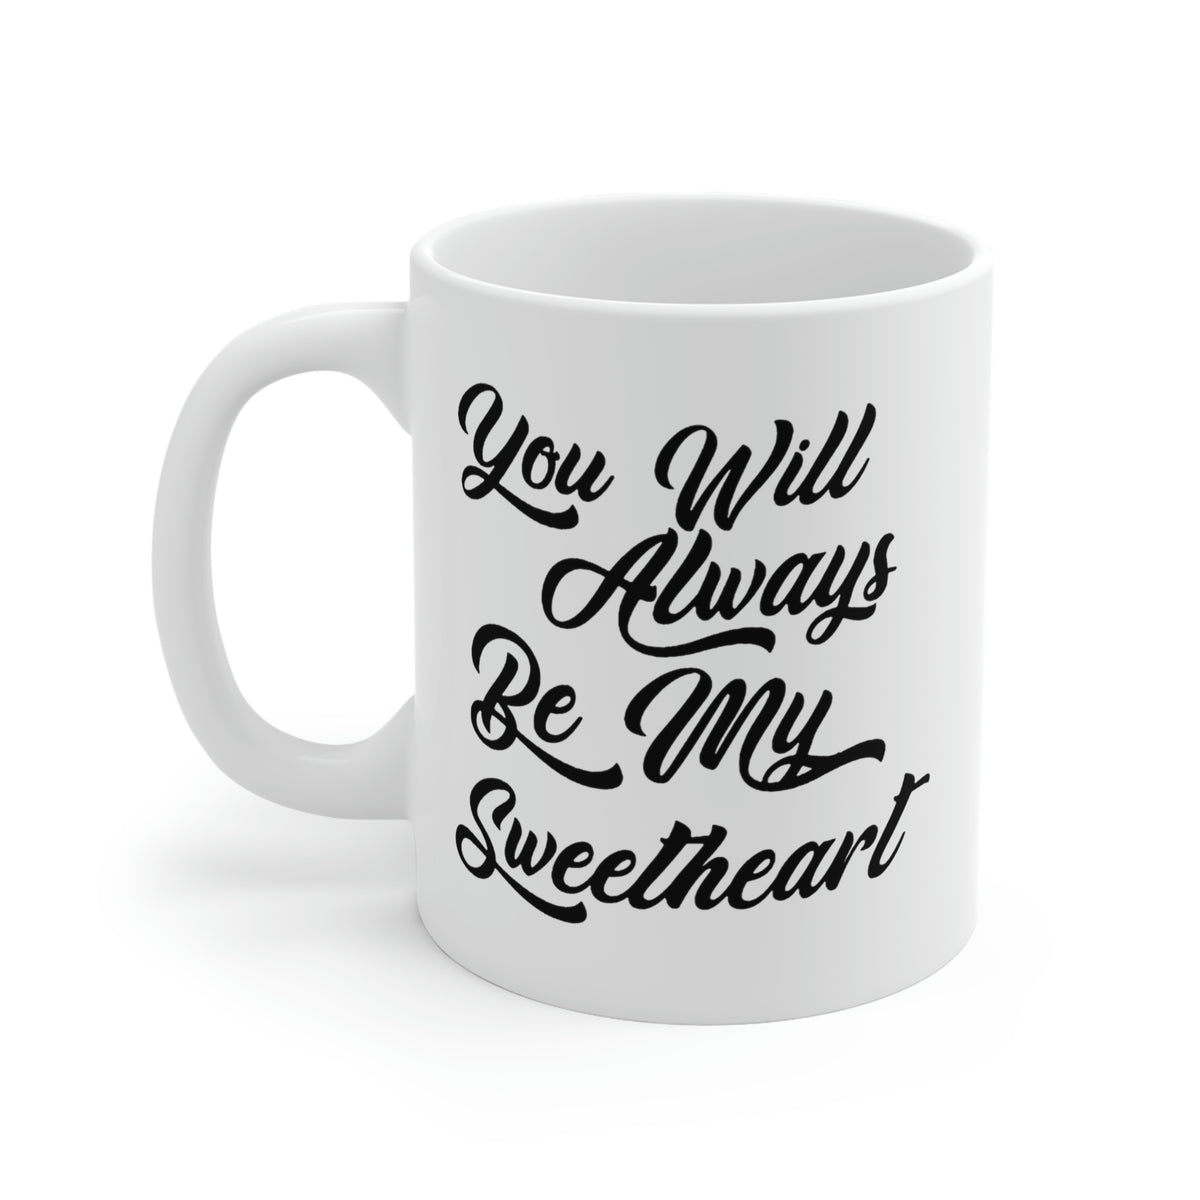 unny Love Coffee Mug - You Will Always Be My Sweetheart - Meaningful Valentine Gifts For Her - CA